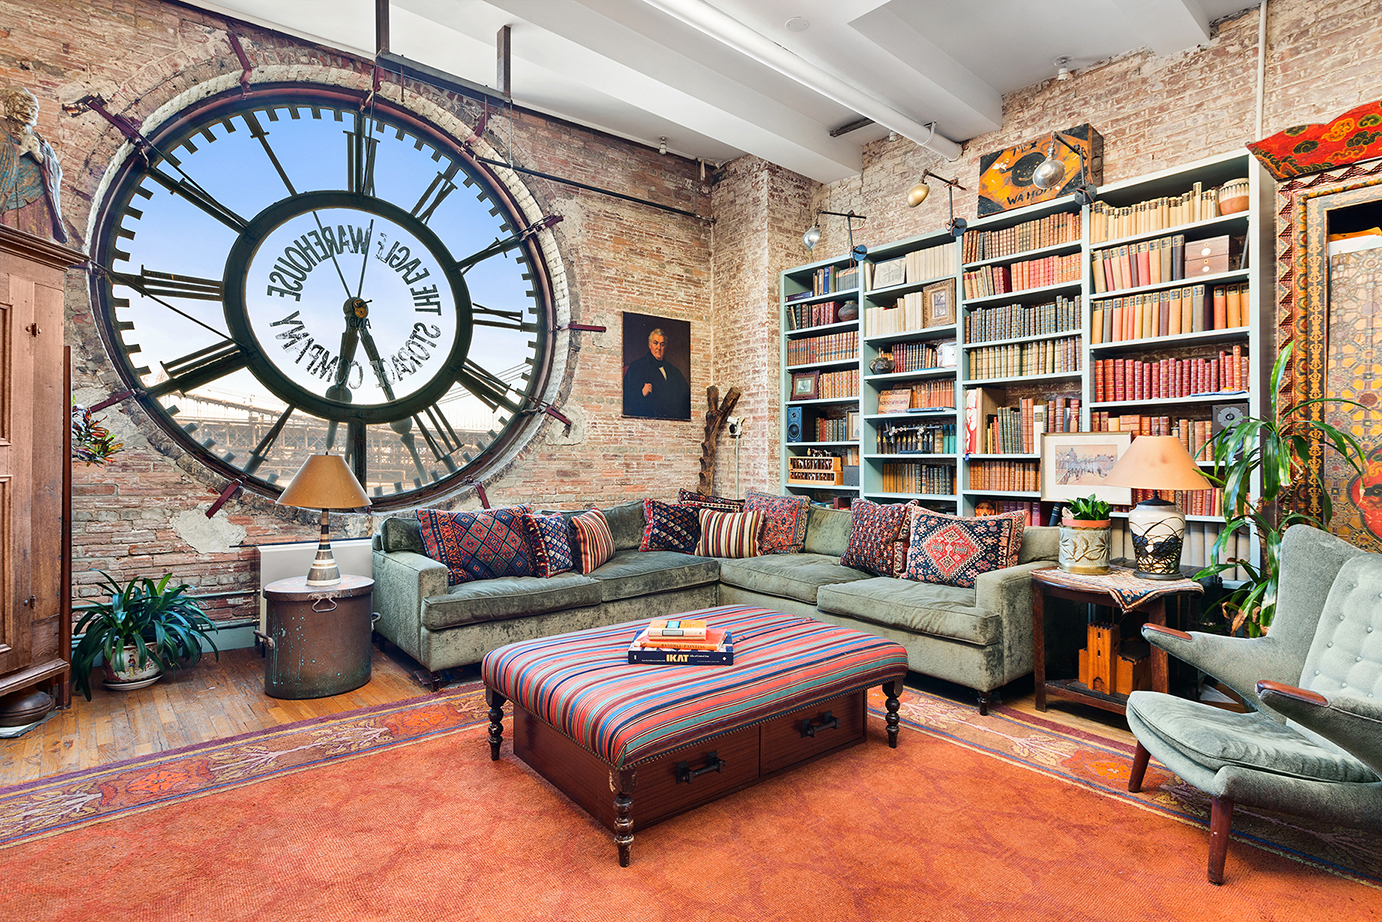 A living area with exposed brick, a large clock with views of the Brooklyn Bridge, a green couch, blue bookshelves, and beamed ceilings.